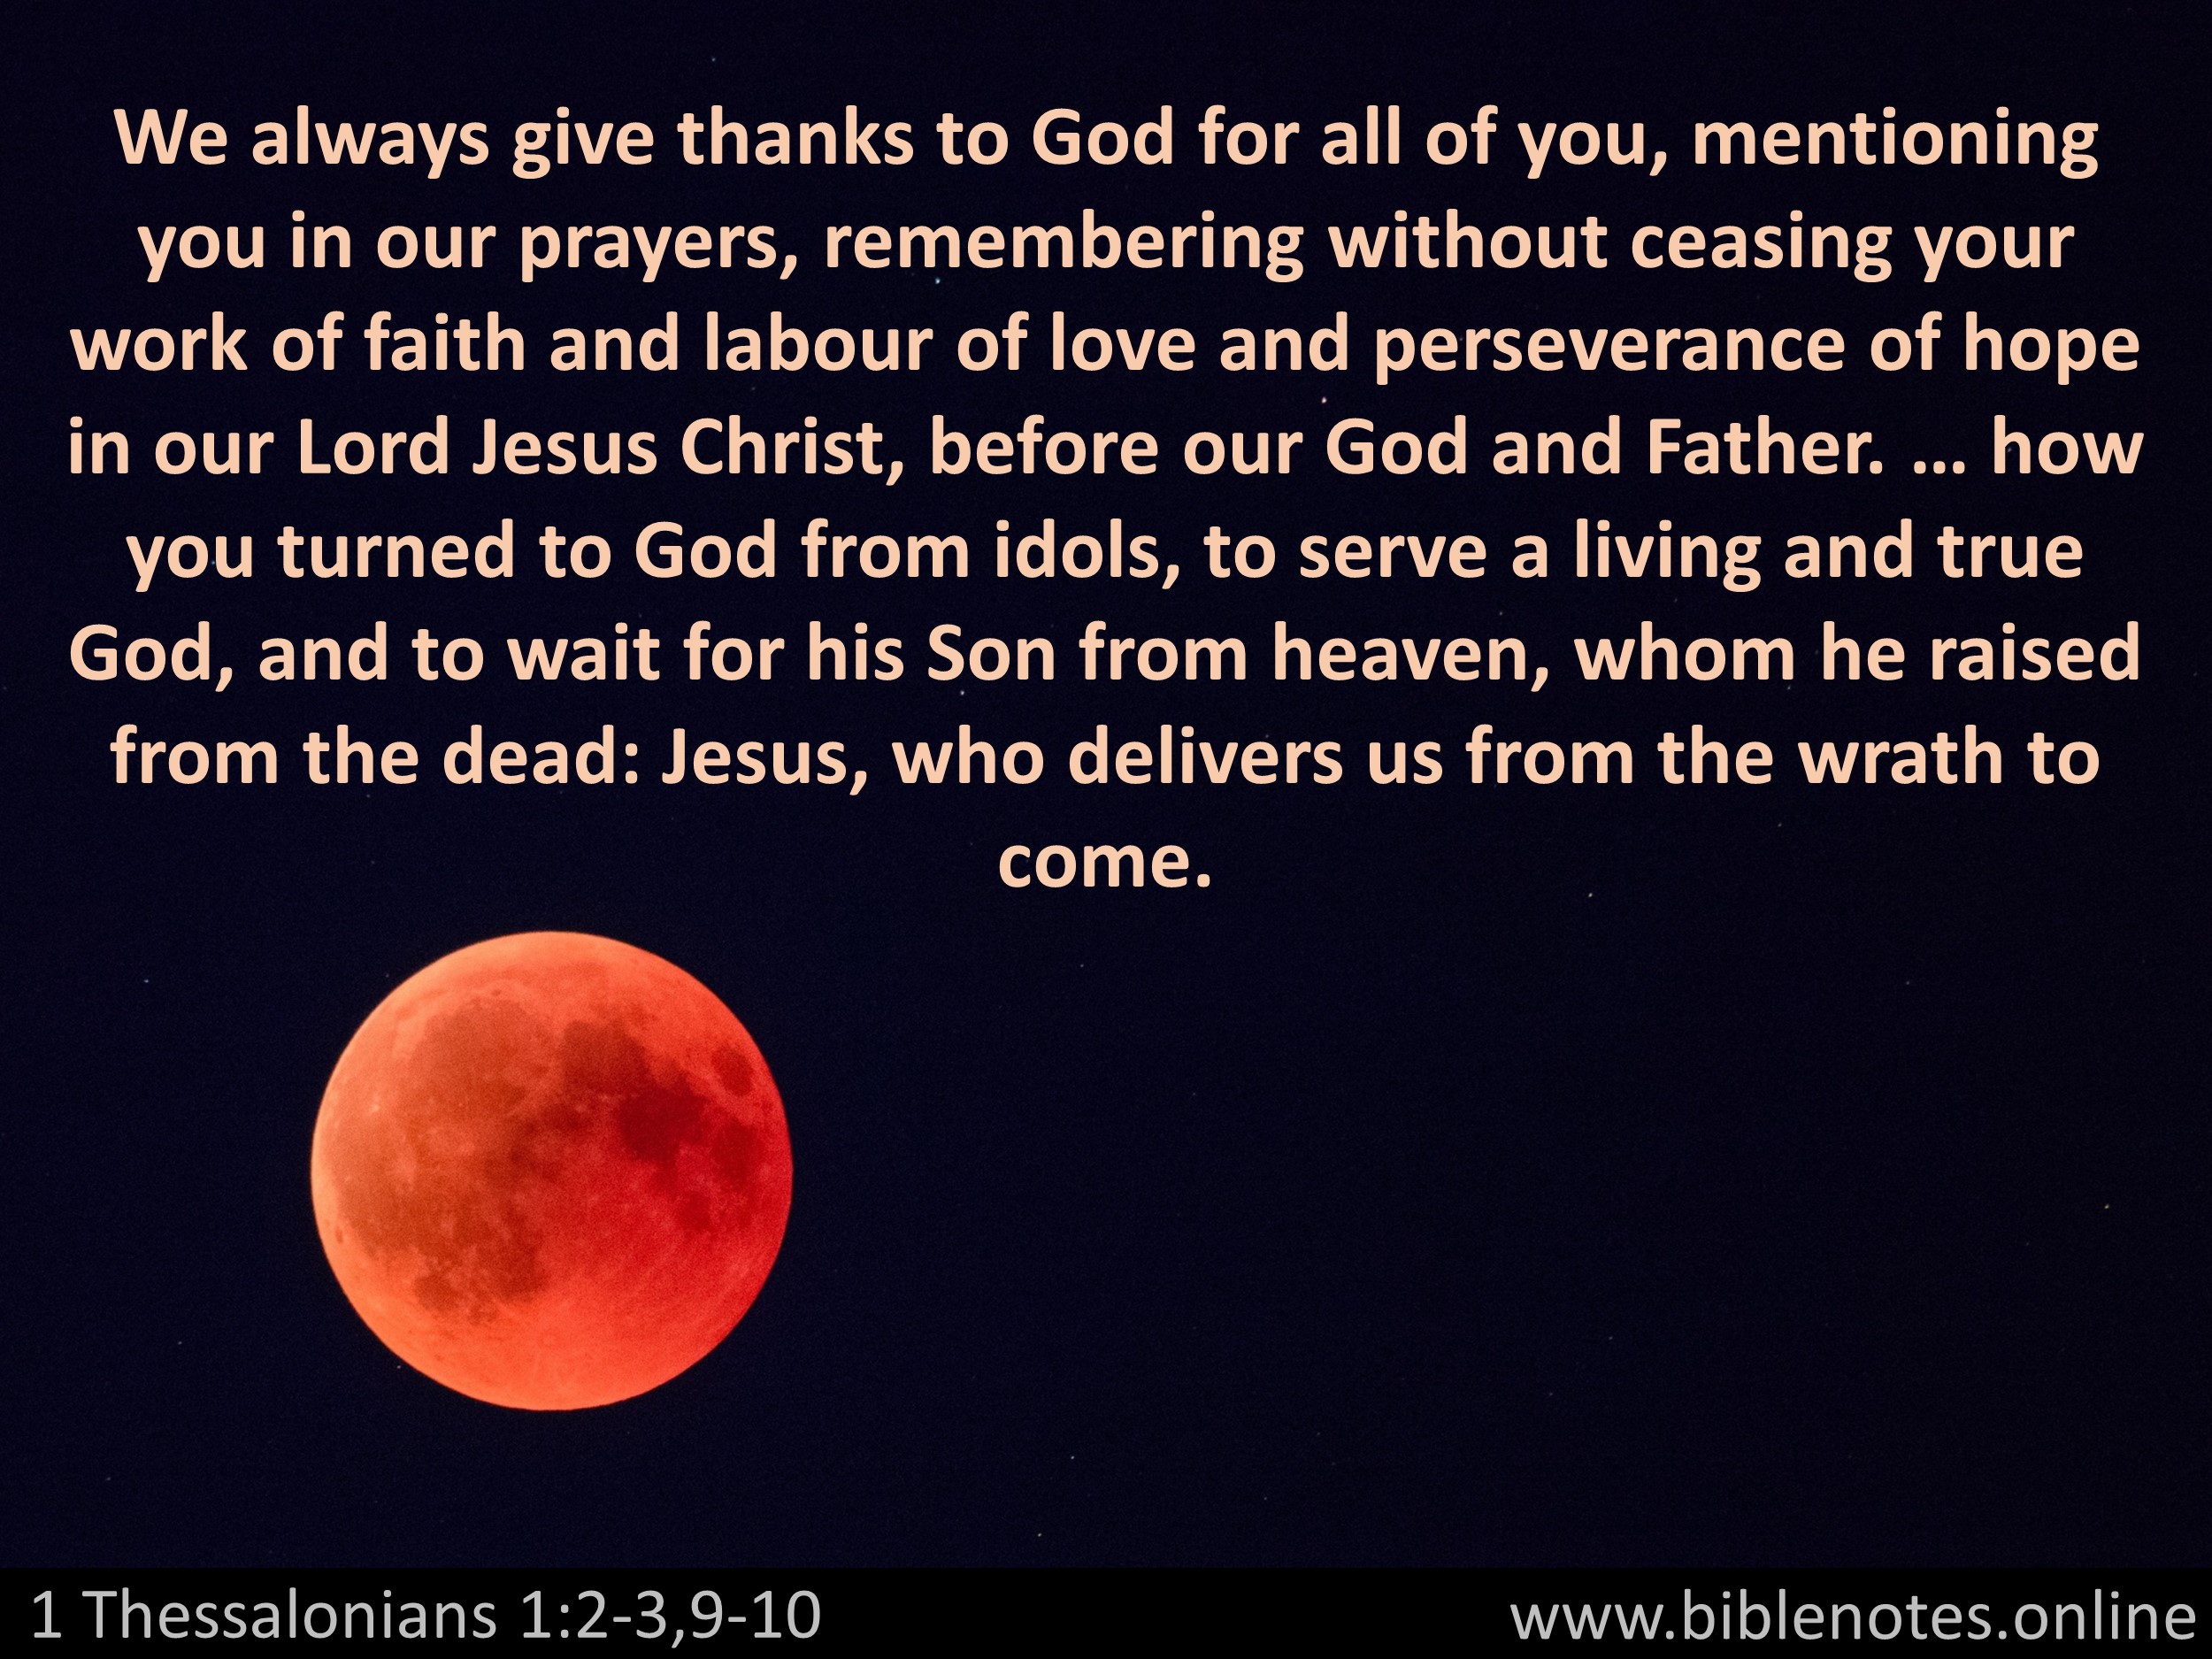 Bible Verse from 1 Thessalonians Chapter 1